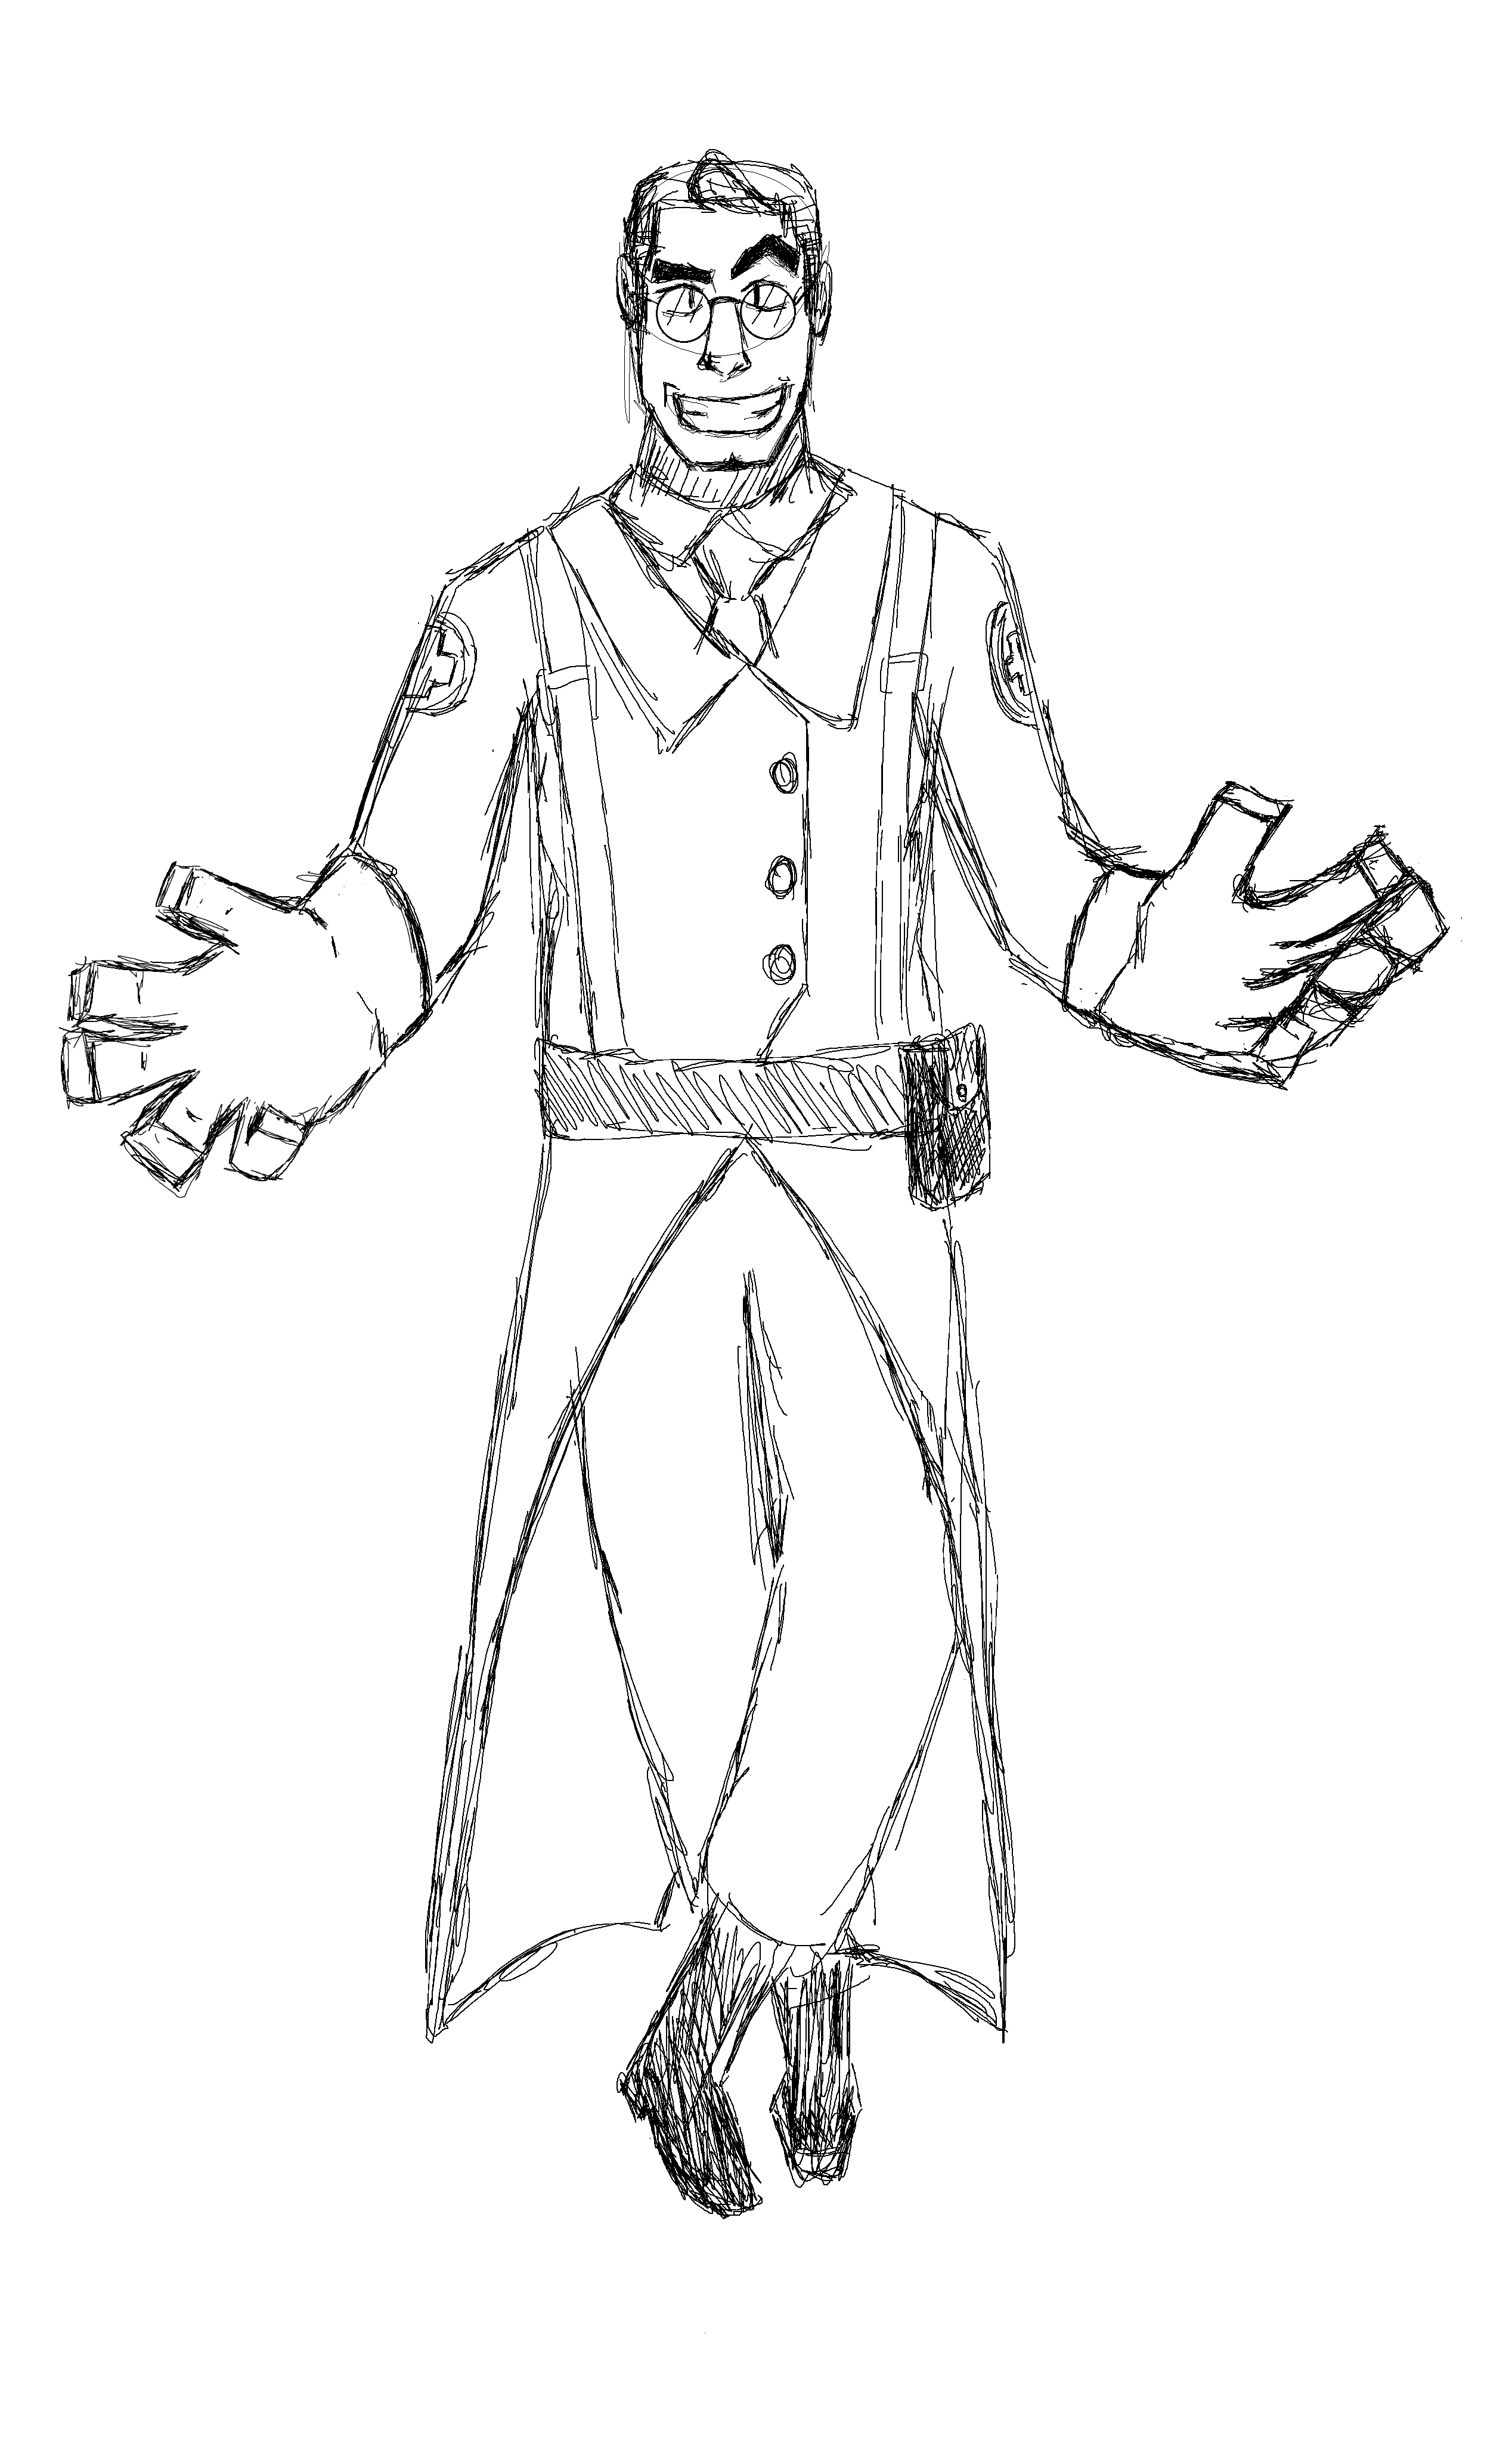 Silly medic drawing i did in ms paint how do you draw hands aaaaa rtf